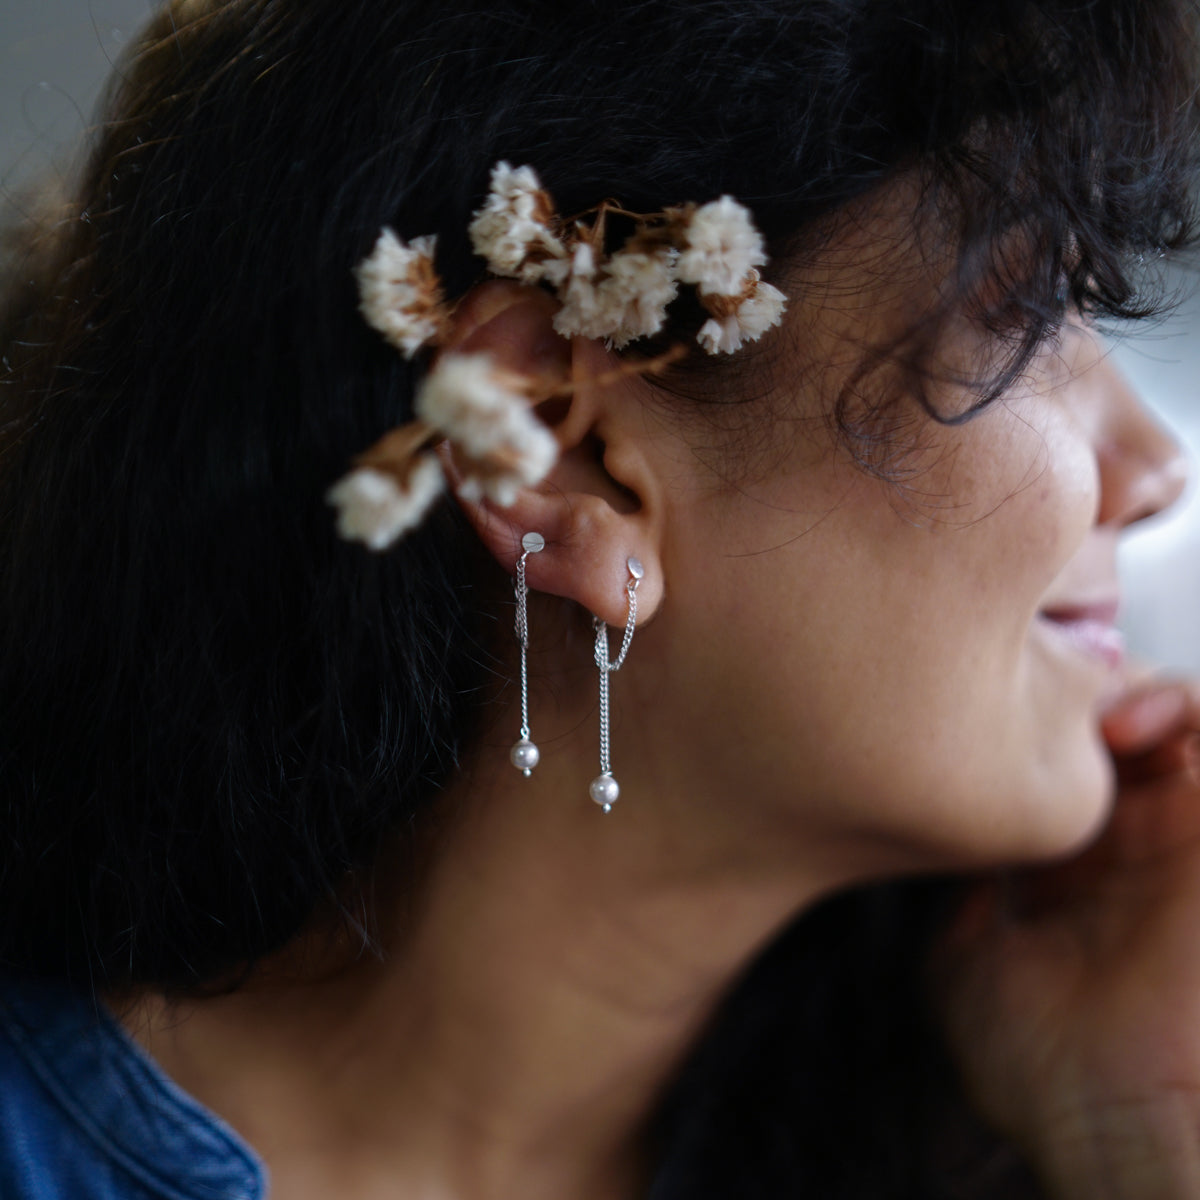 a woman with a flower in her ear